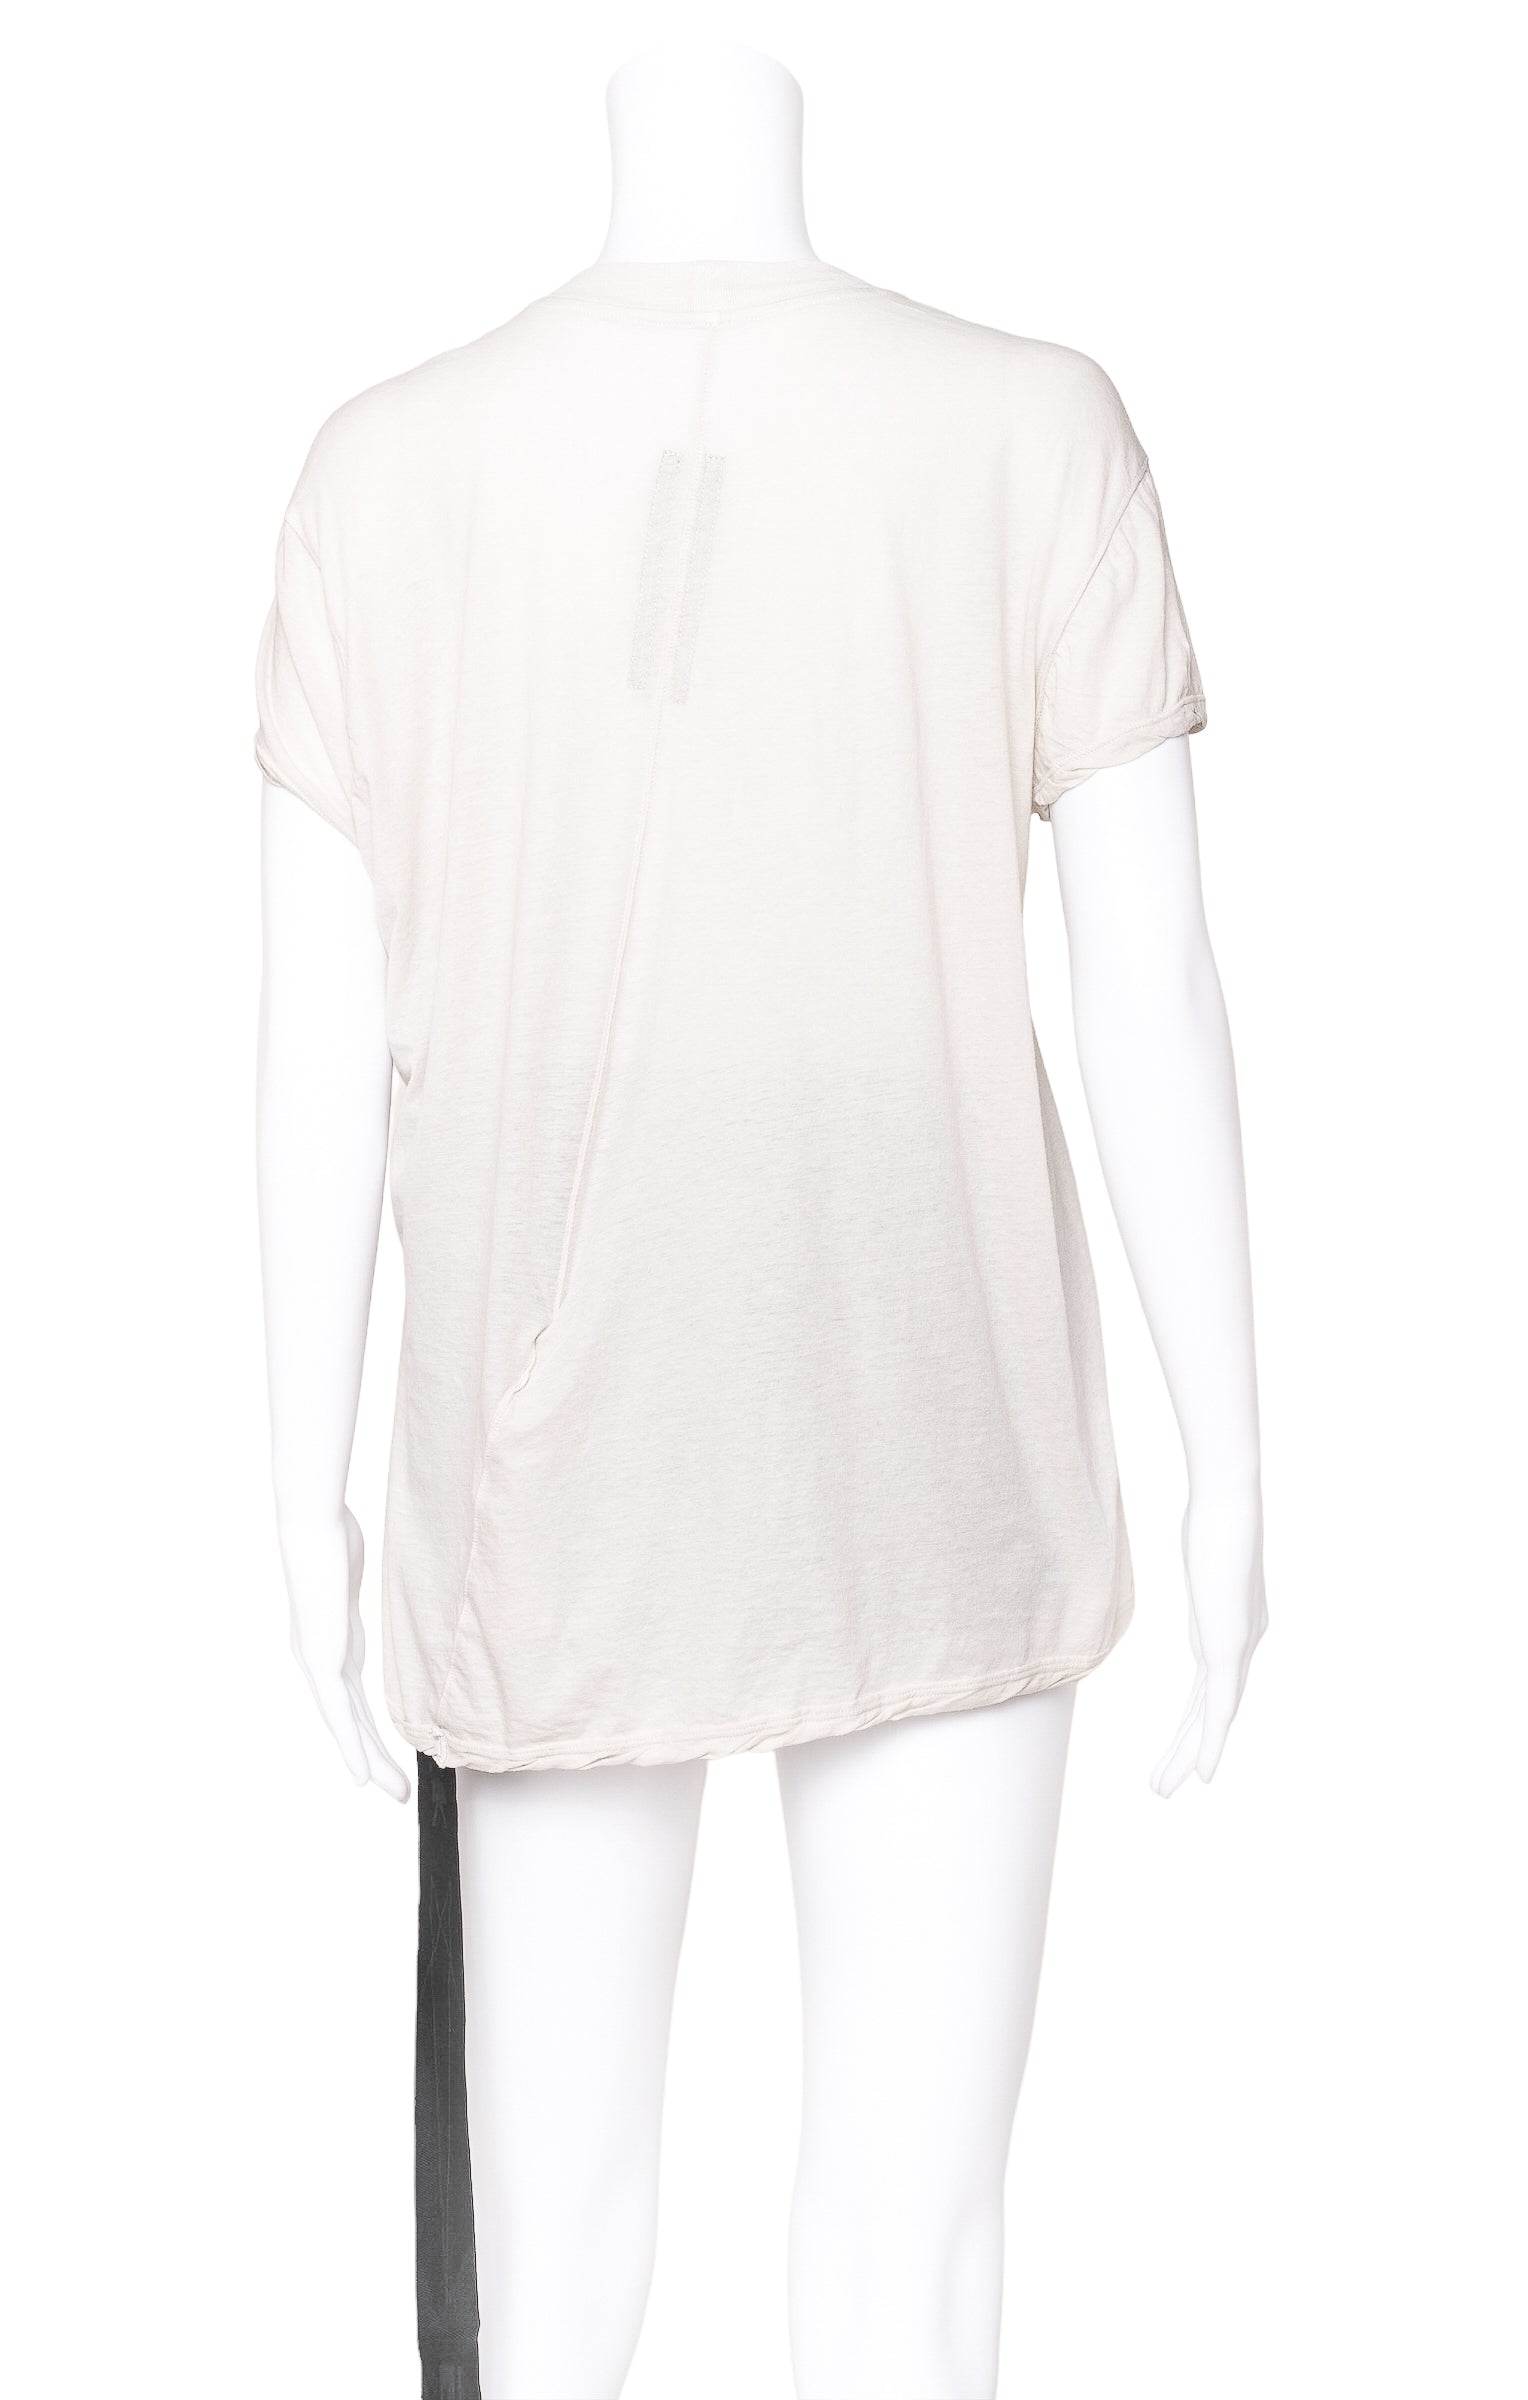 RICK OWENS (NEW) with tags Top Size: S